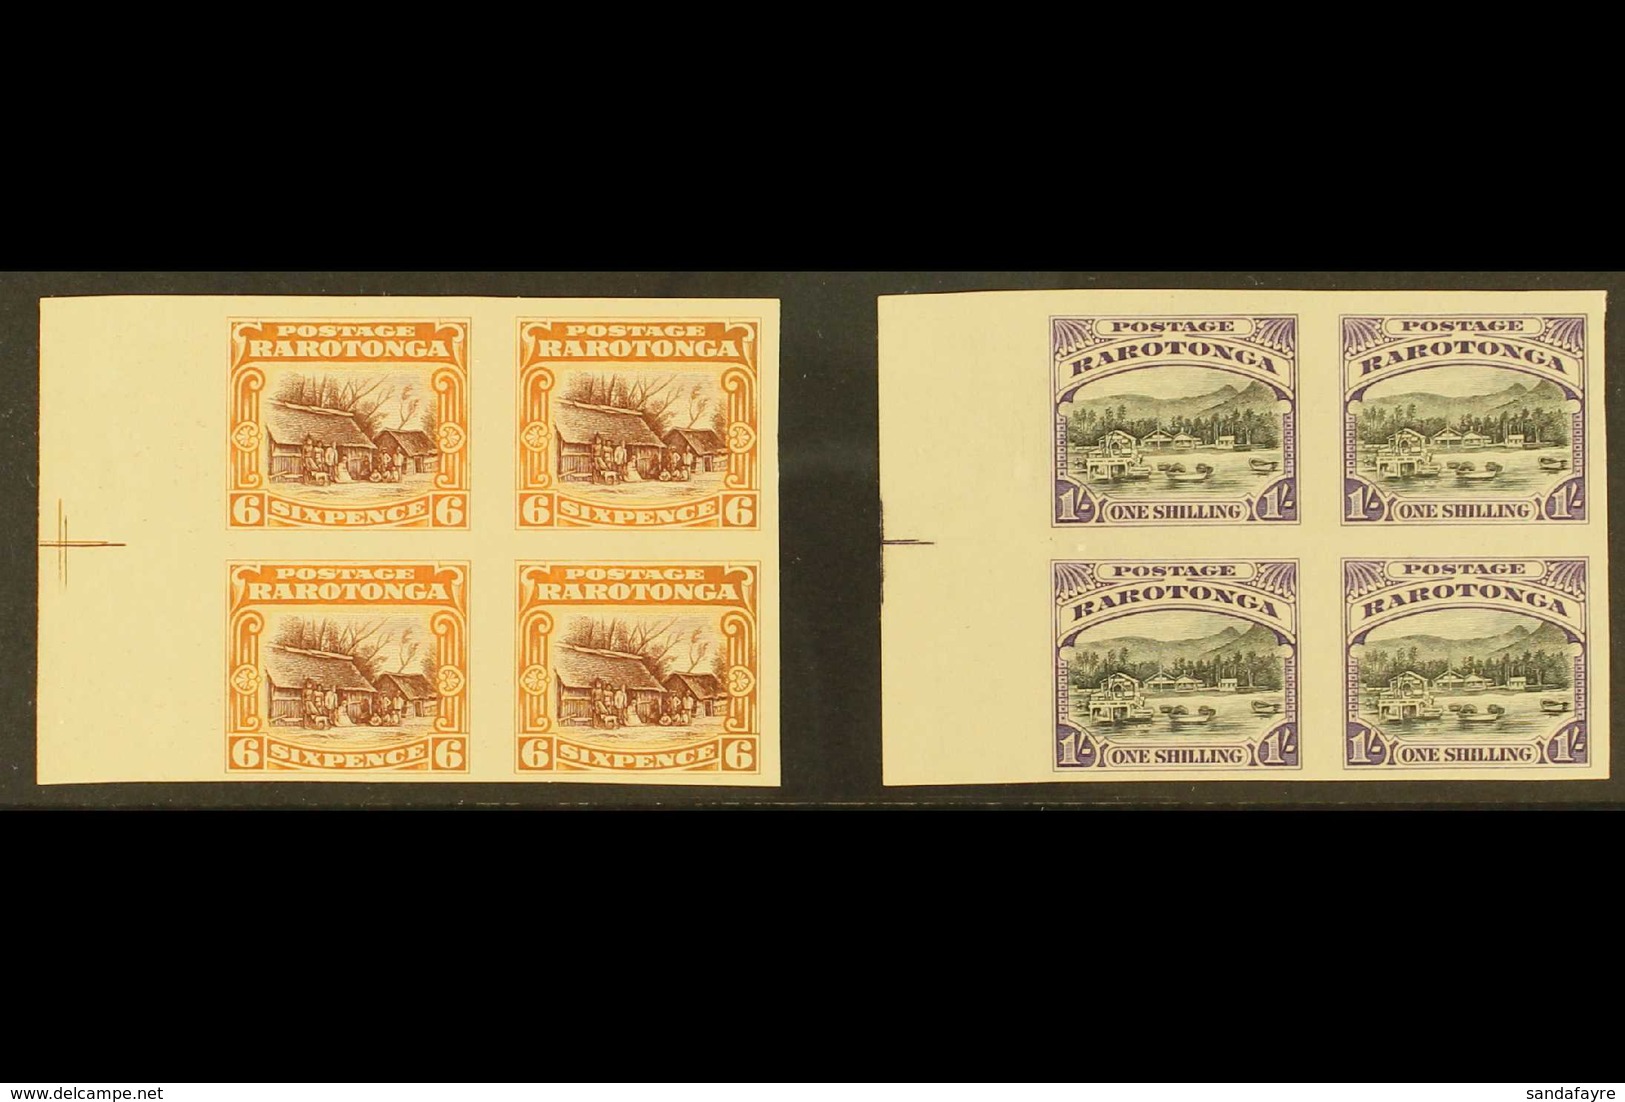 1920 Pictorial Definitive 6d And 1s (as SG 74/75) - IMPERF PLATE PROOF BLOCKS OF FOUR Printed In The Issued Colours On U - Cook Islands